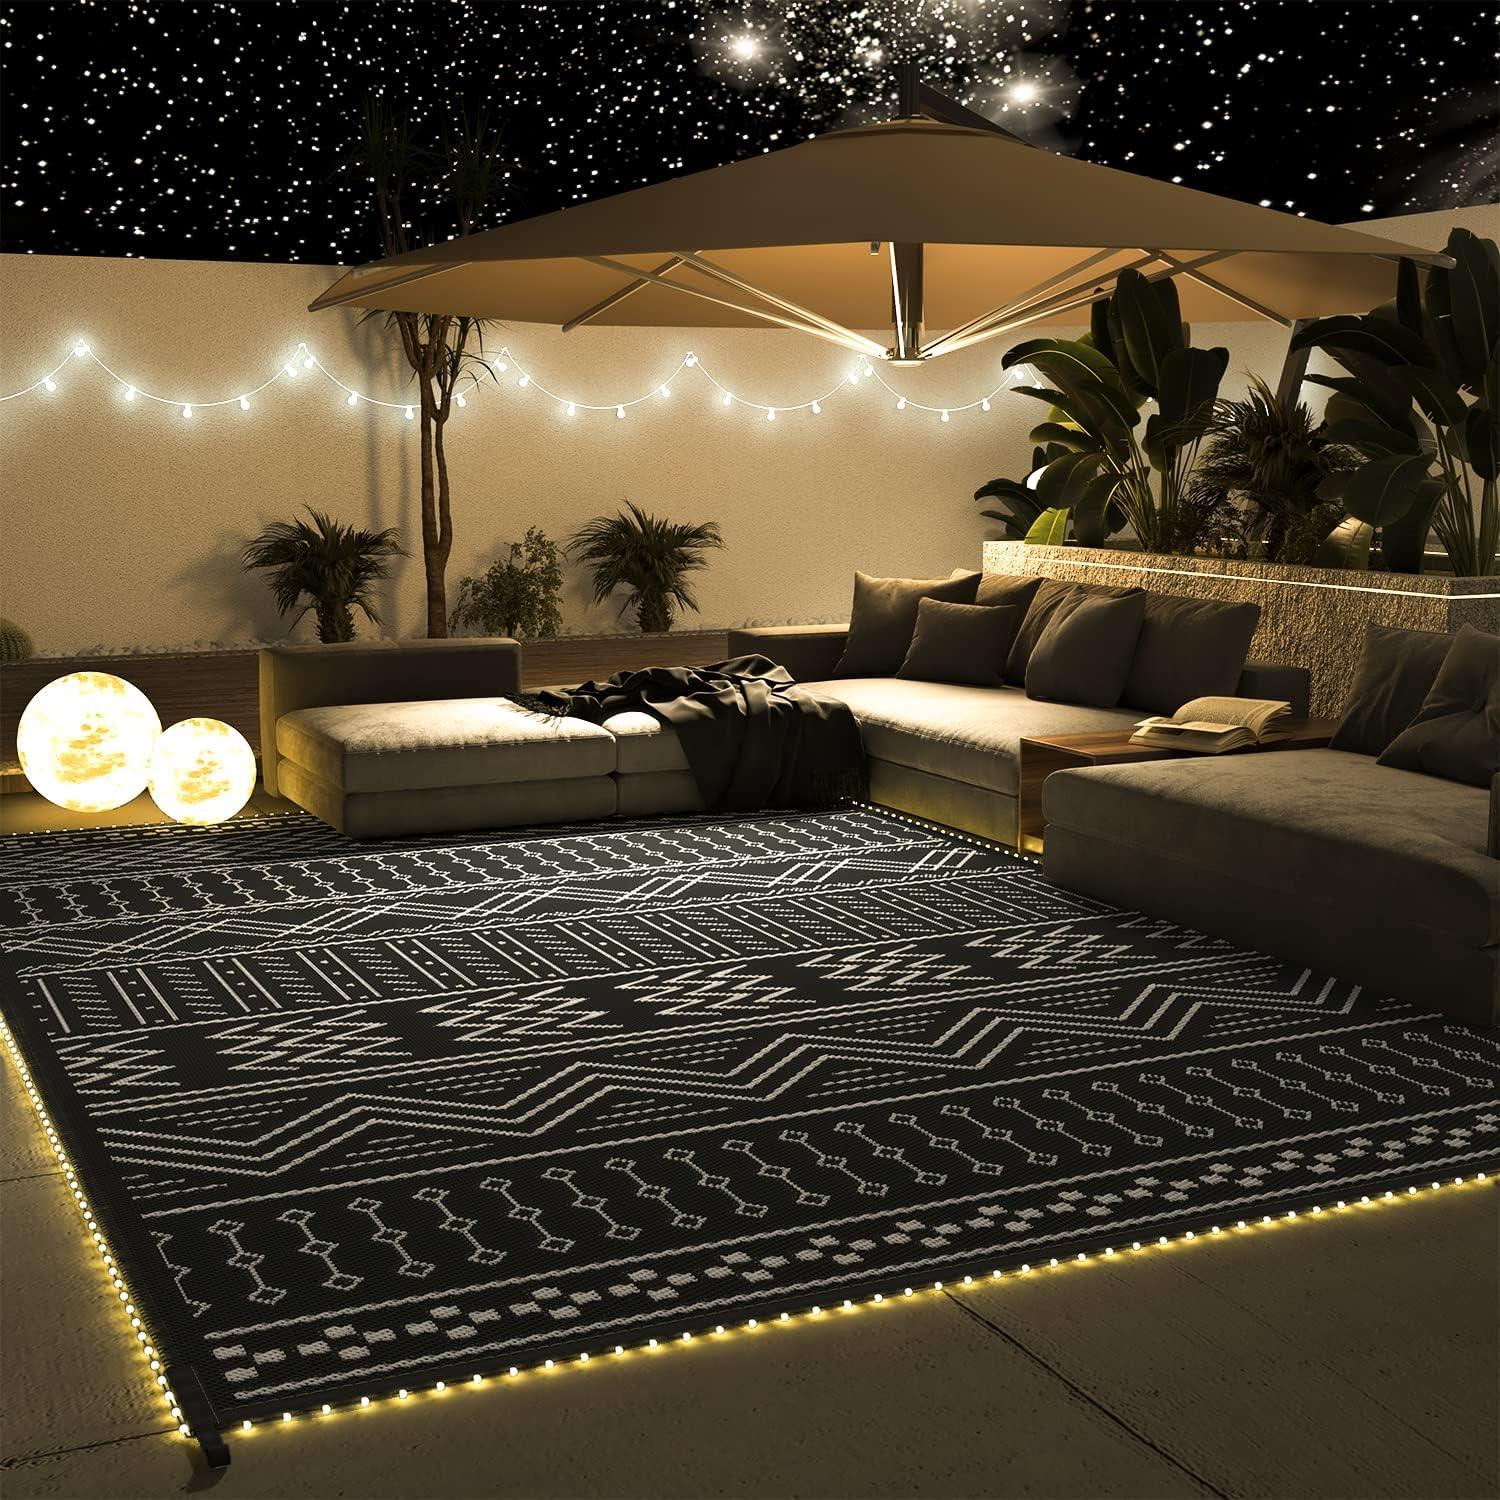 LazyRug™ Outdoor Rug Carpet 9x12 ft for Patio RV Camping with Led Strip Lights Waterproof Plastic Straw Rug Reversible - Lazy Pro